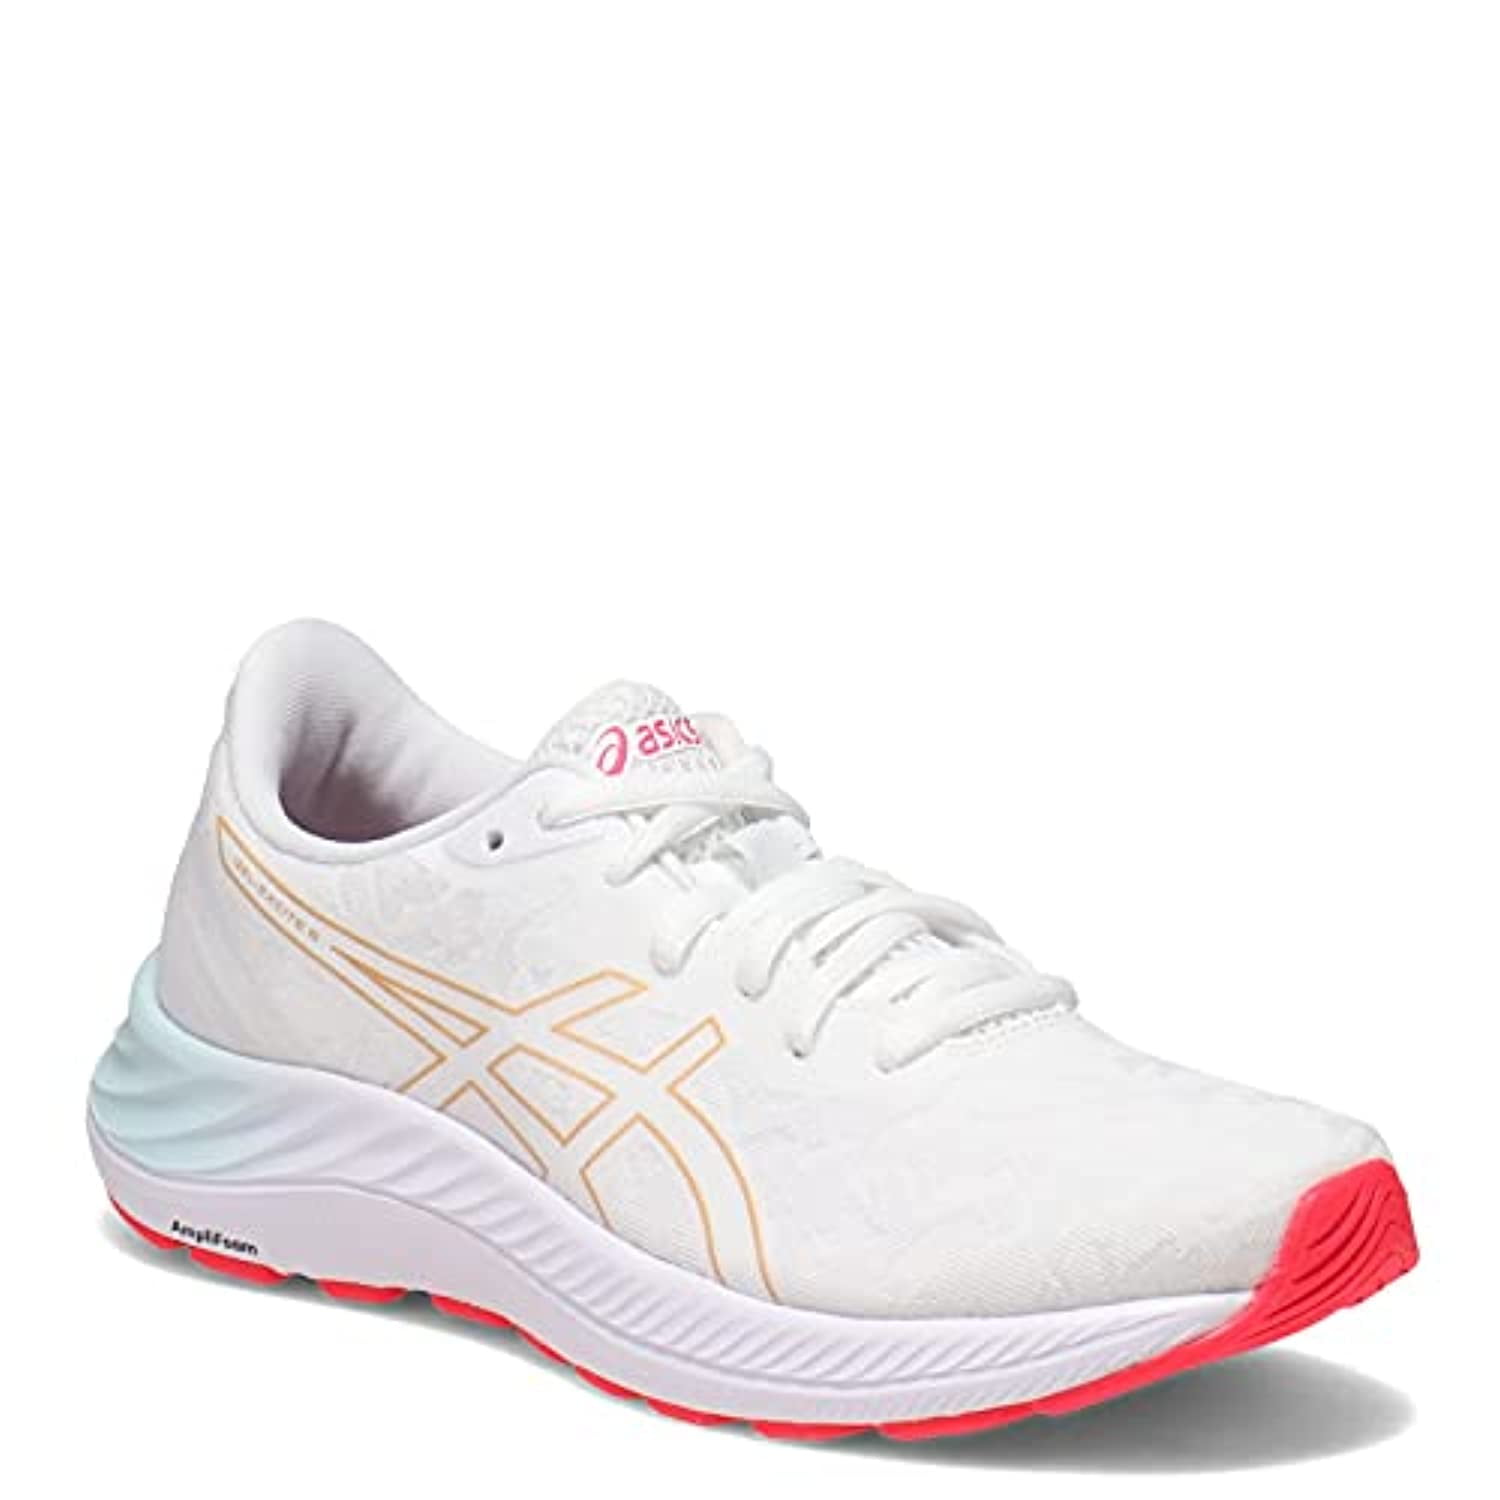 ASICS Women's Gel-Excite 8 Twist Running Shoes, 8, White/Champagne